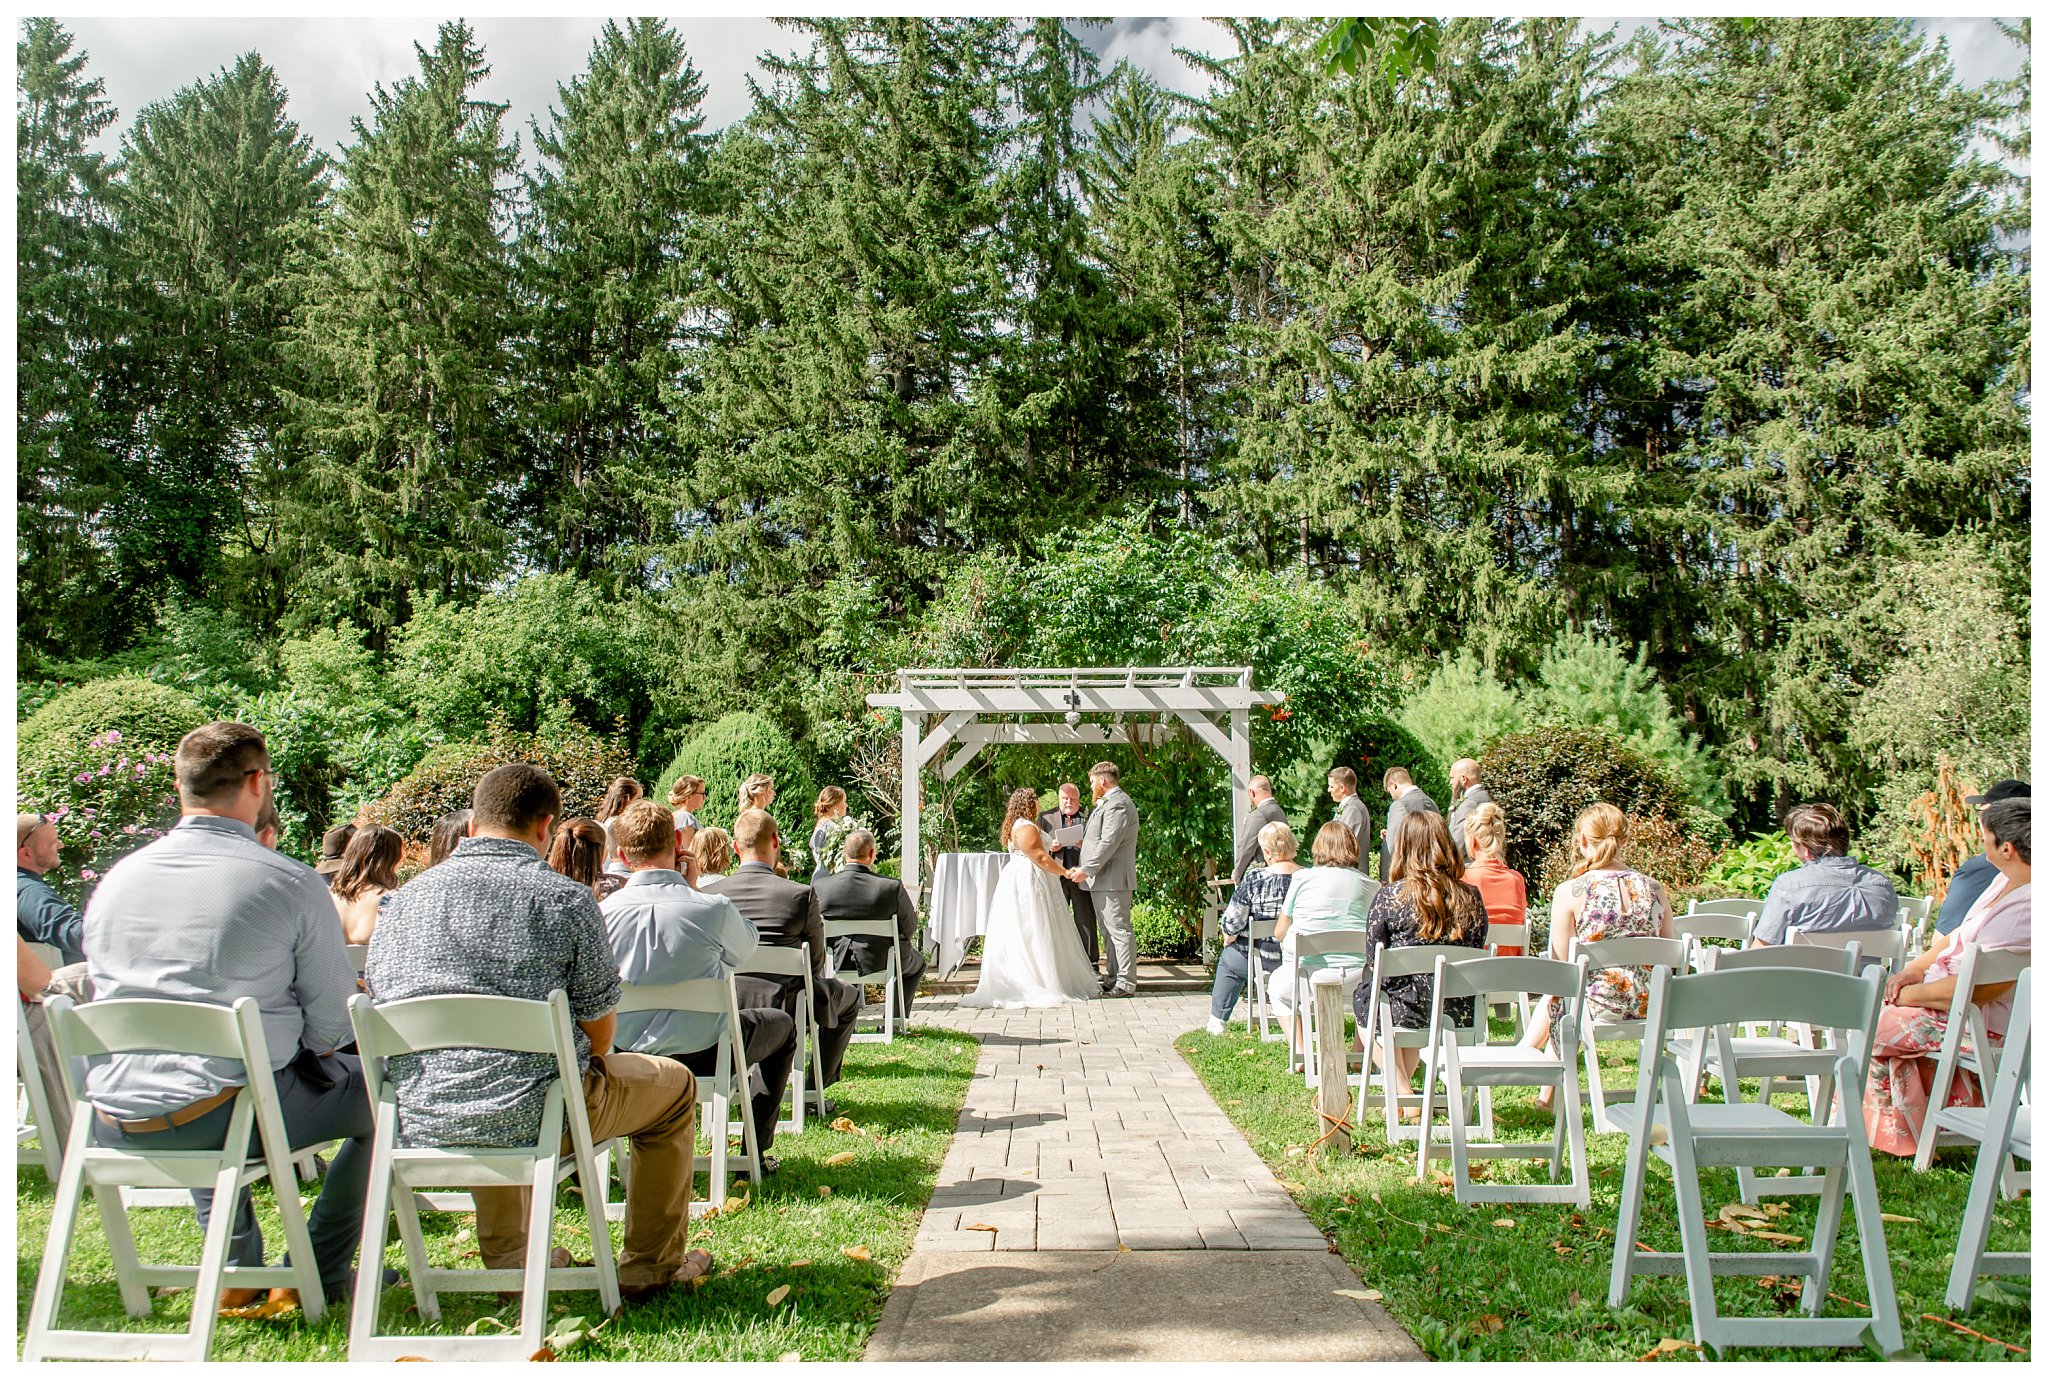 Dibble's Inn Apply Orchard Wedding. Emily and Don. Summer 2020. Joanna Young Photography_0028.jpg